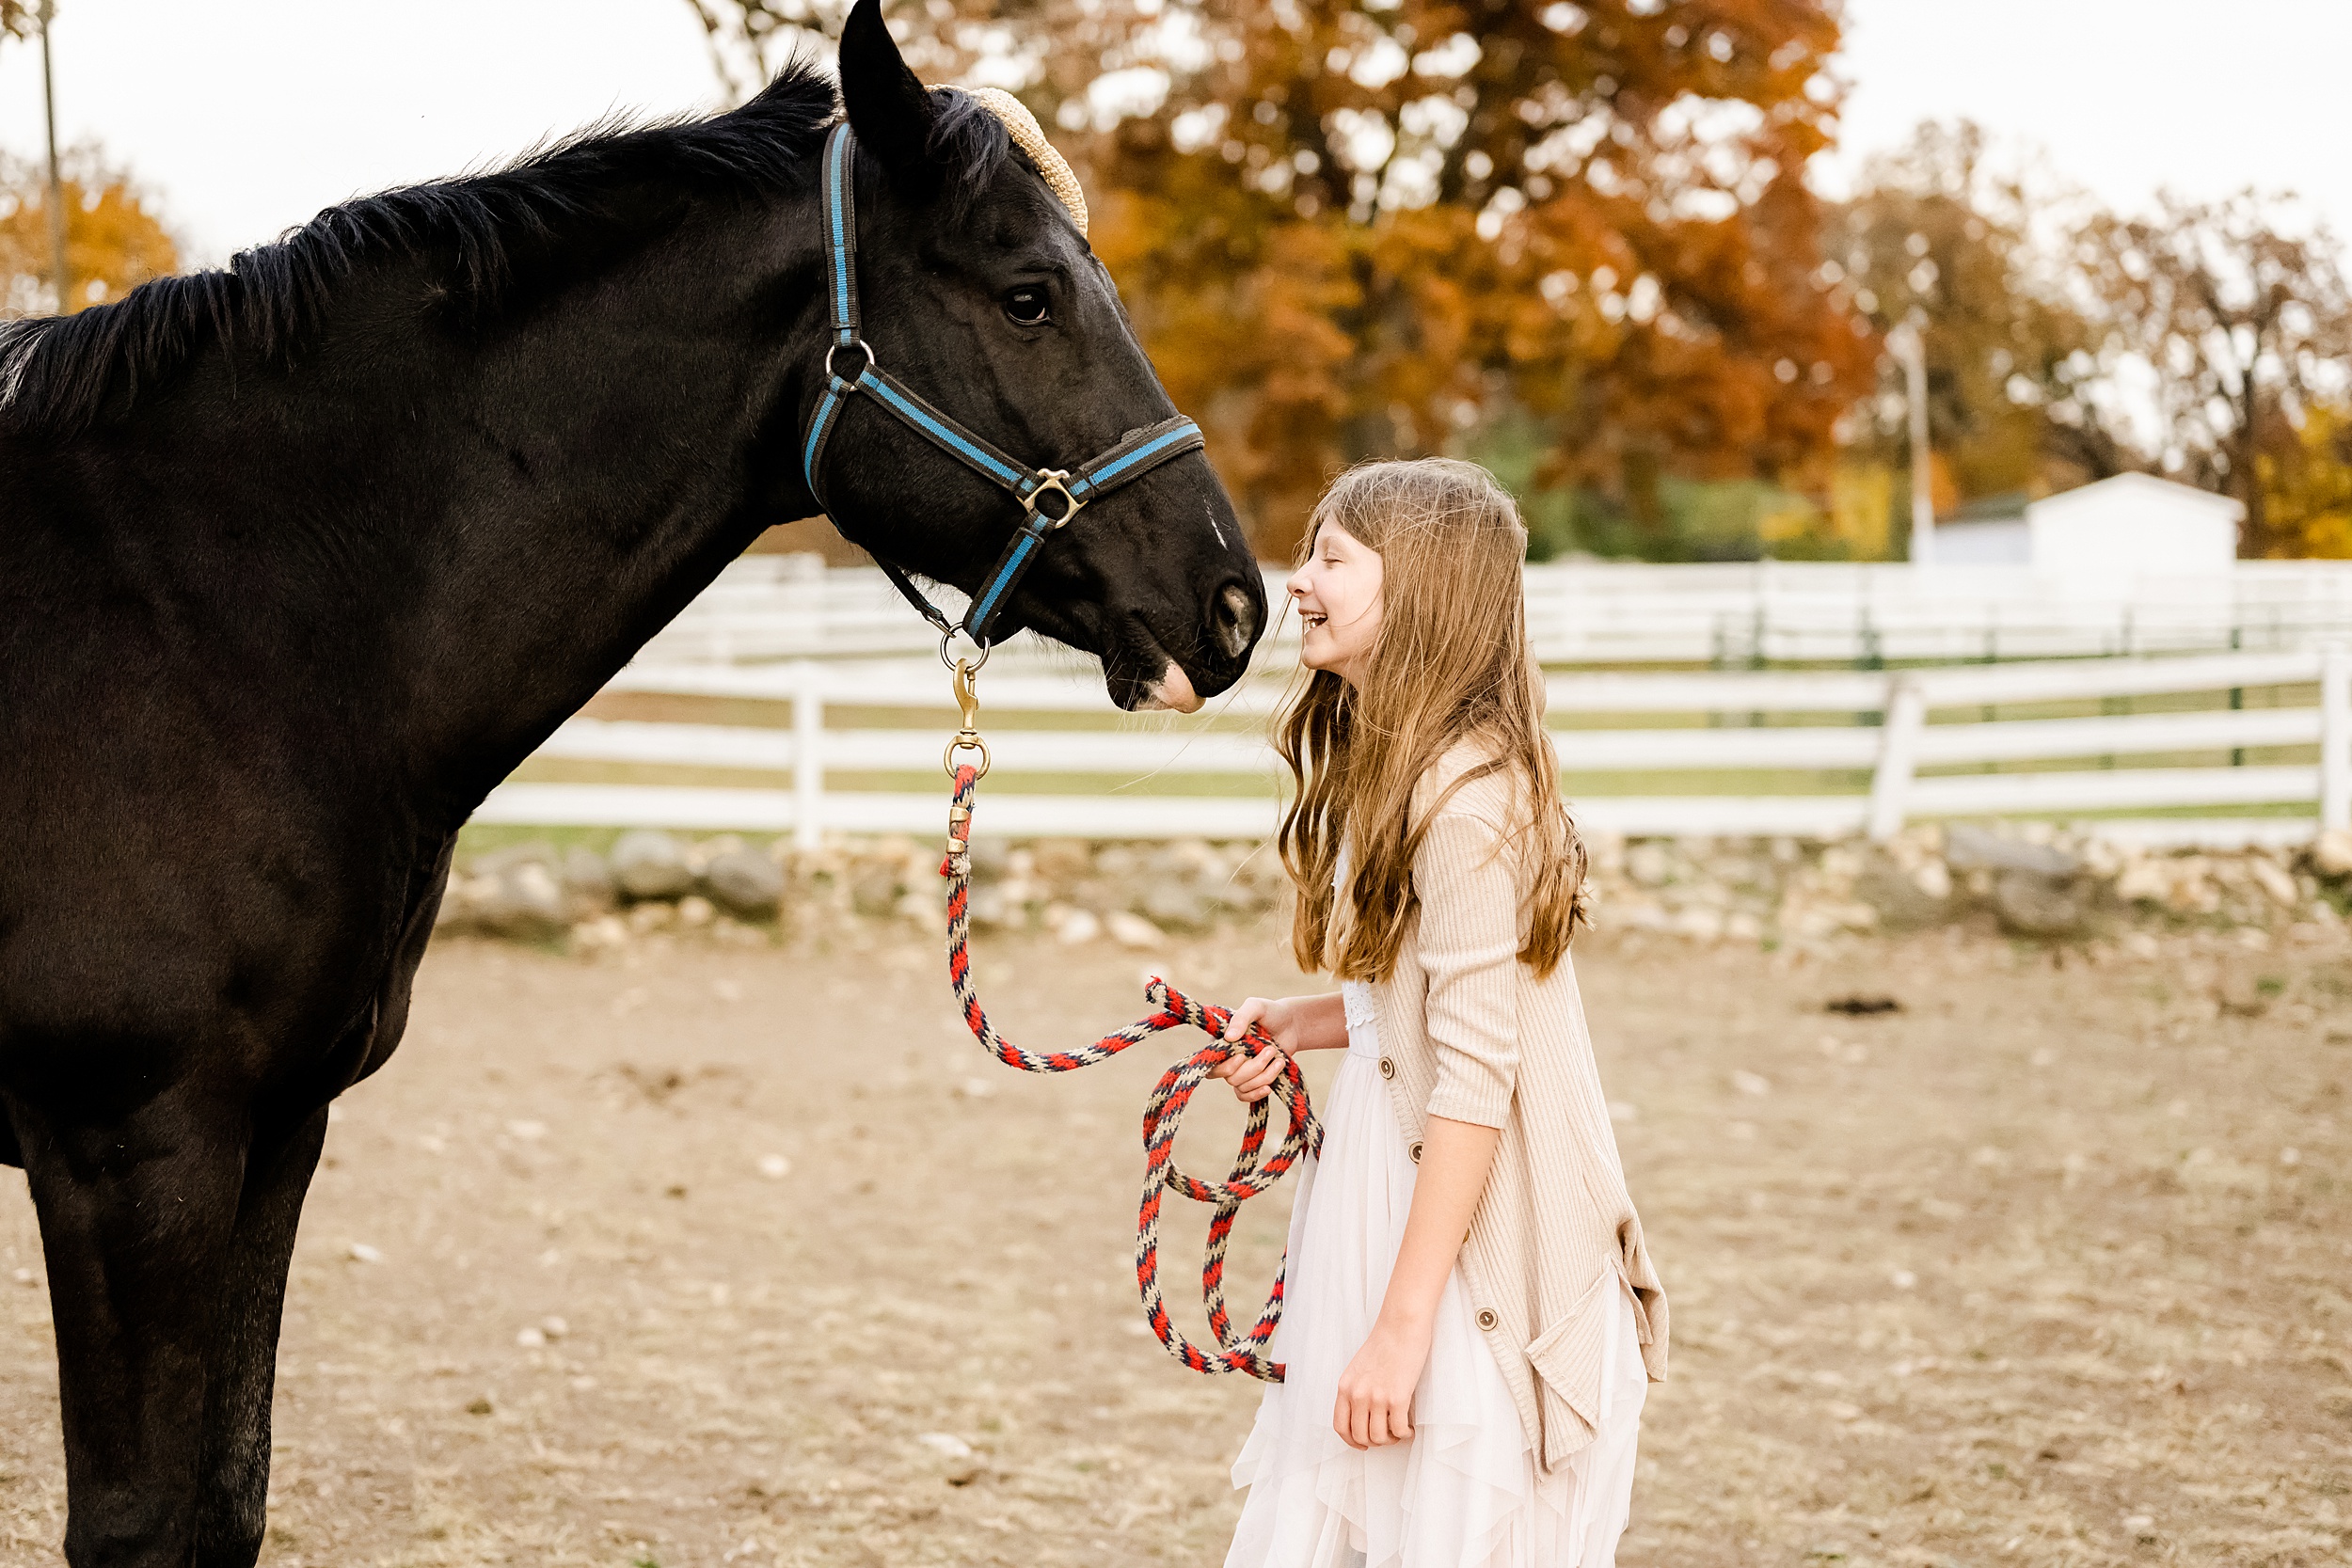 A young girl laughs while walking her horse in a pasture